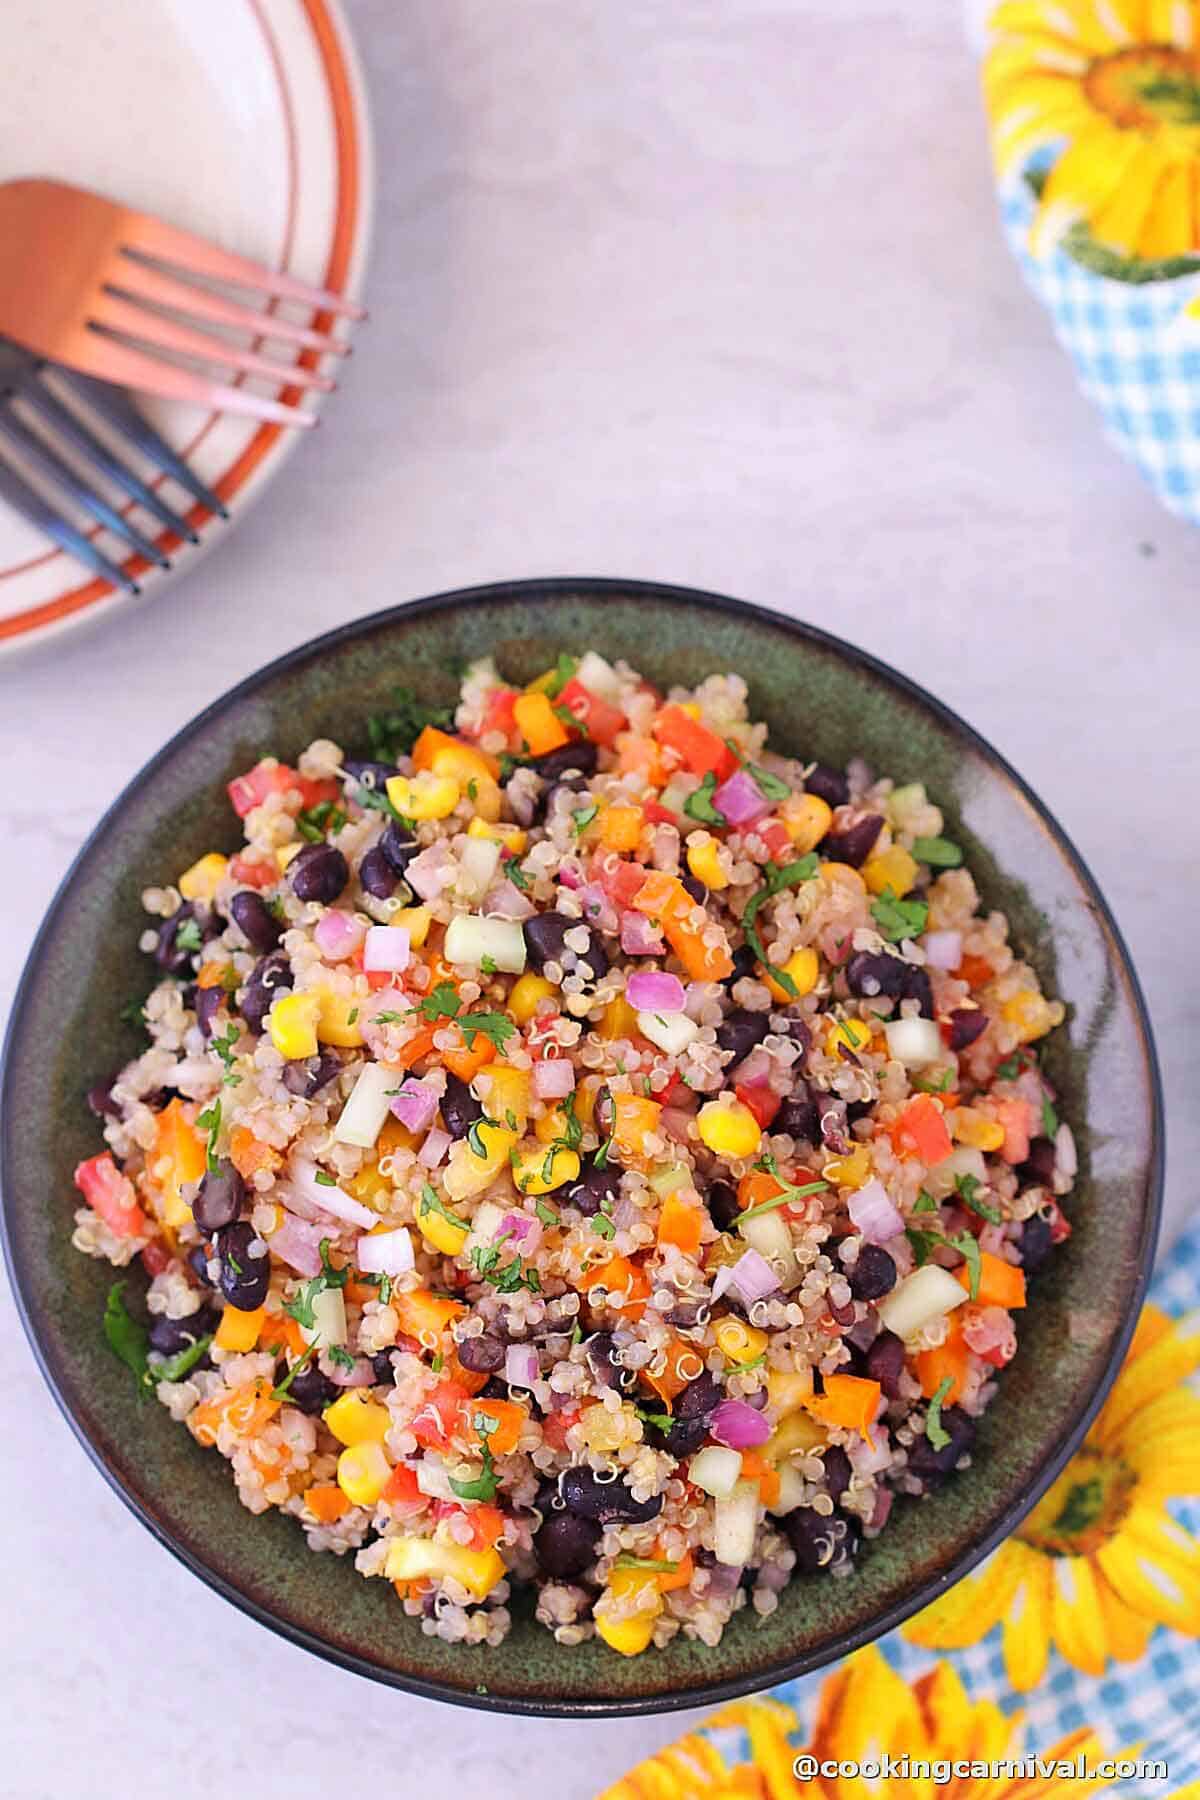 Black Bean Quinoa Salad with lemon dressing, served in a bowl.